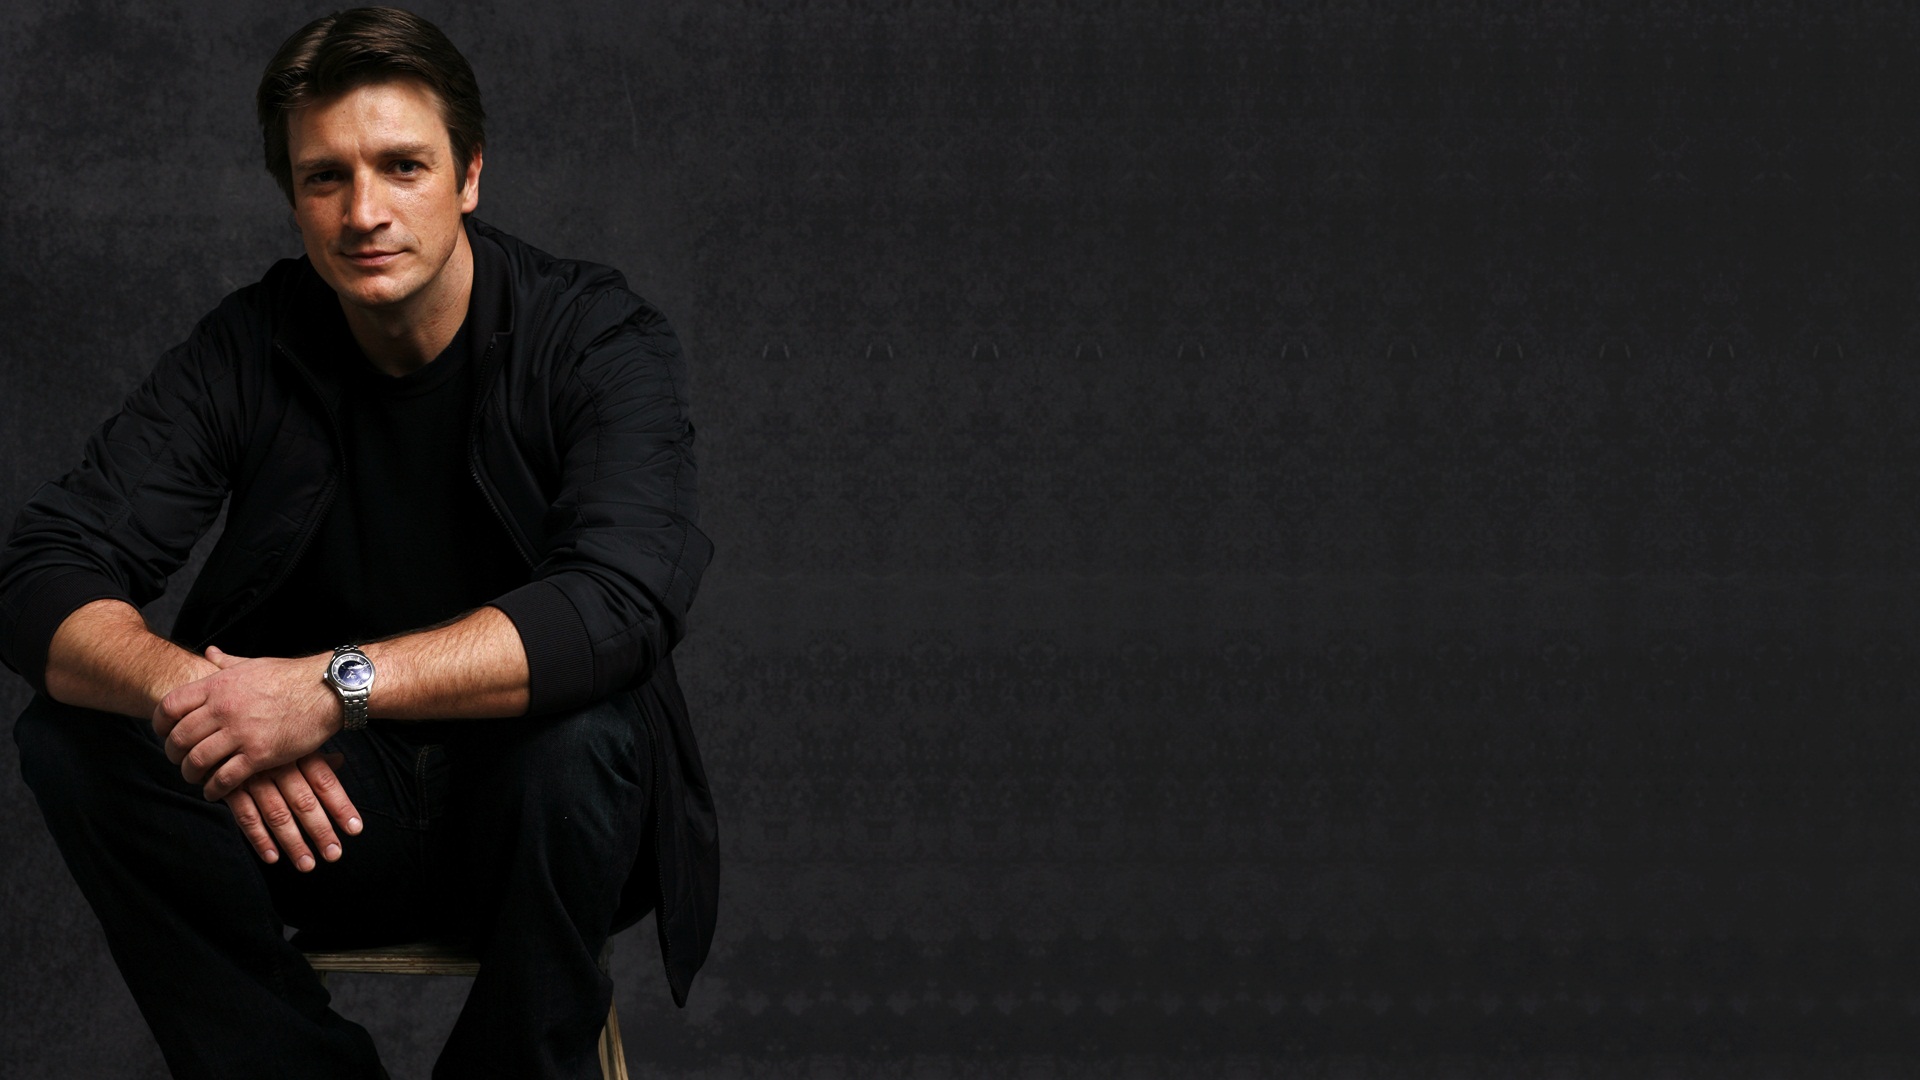 Nathan Fillion Background Wallpaper High Definition Quality